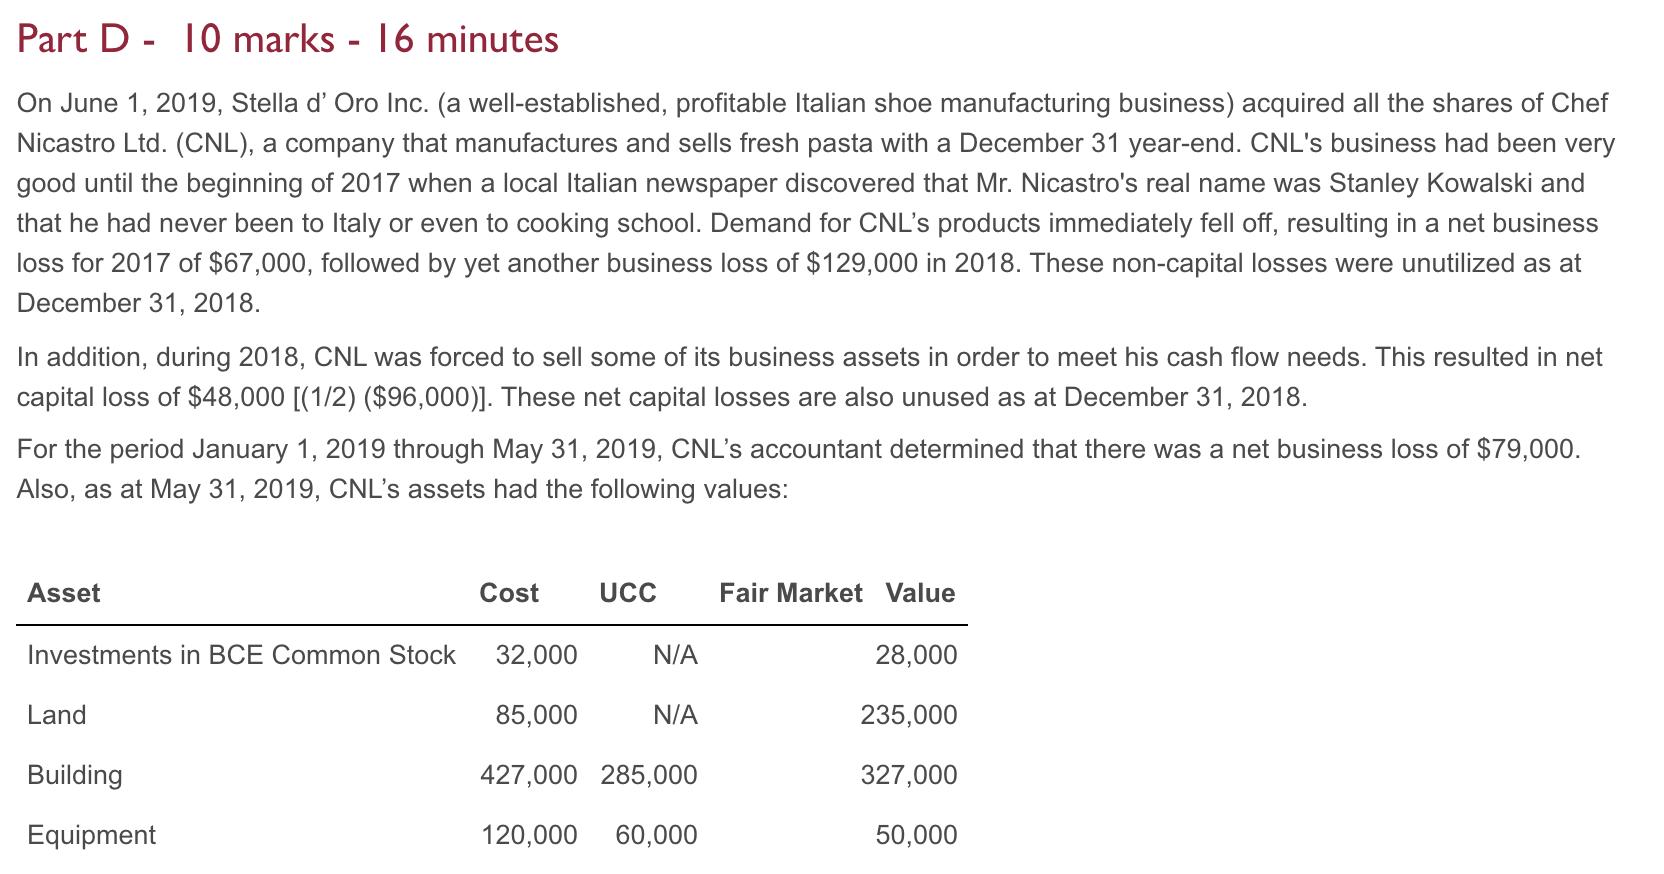 Part D - 10 marks - 16 minutes On June 1, 2019, Stella dOro Inc. (a well-established, profitable Italian shoe manufacturing